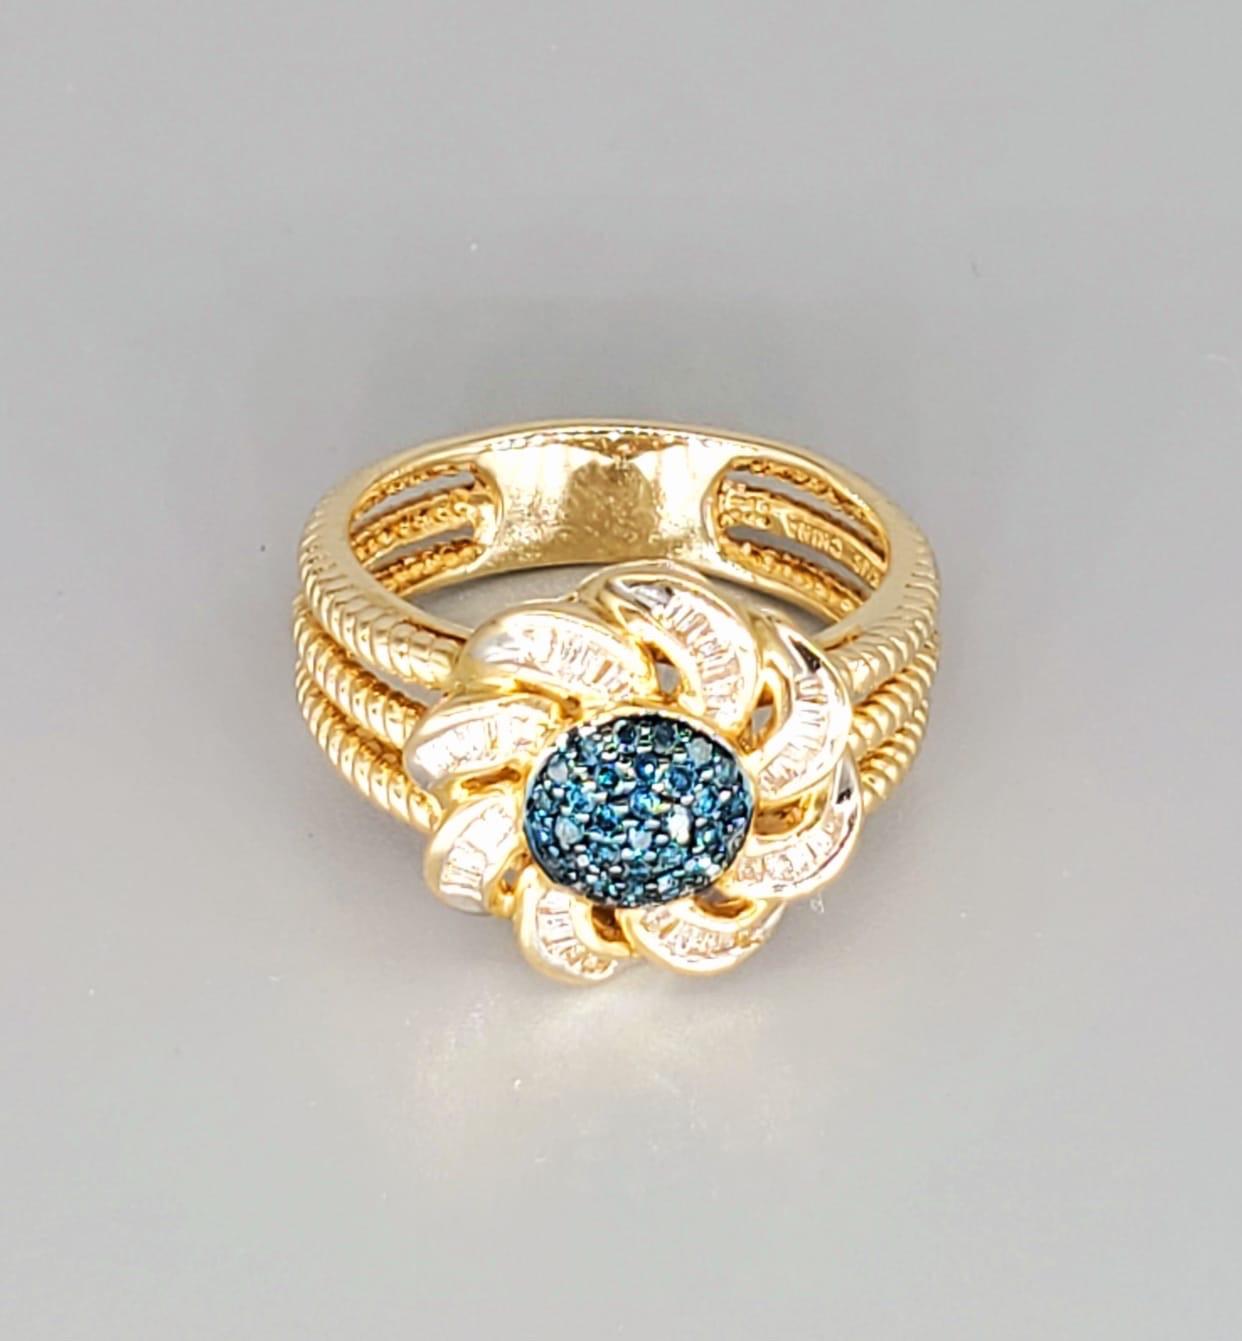 Vintage 1.00 Carat Diamonds Flower Cluster Ring. The ring is in excellent condition and feature blue diamonds in the center as well as surrounded by tapered baguettes on the leaves. The blue diamonds weight a total of approx 0.50 carats & the